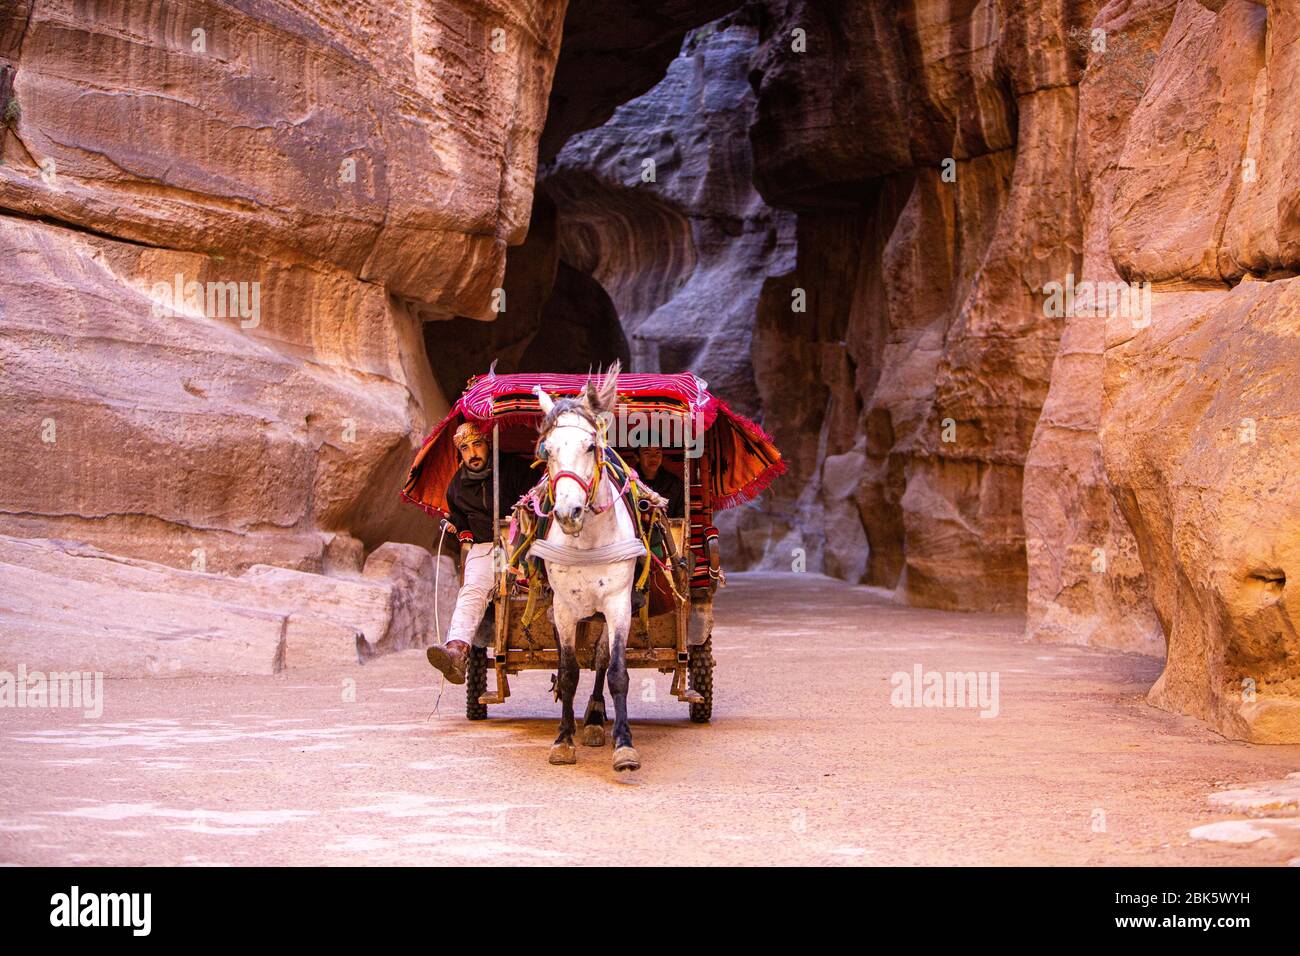 Horse drawn carriages in Siq Slot Canyon at the City of Petra, Jordan Stock Photo